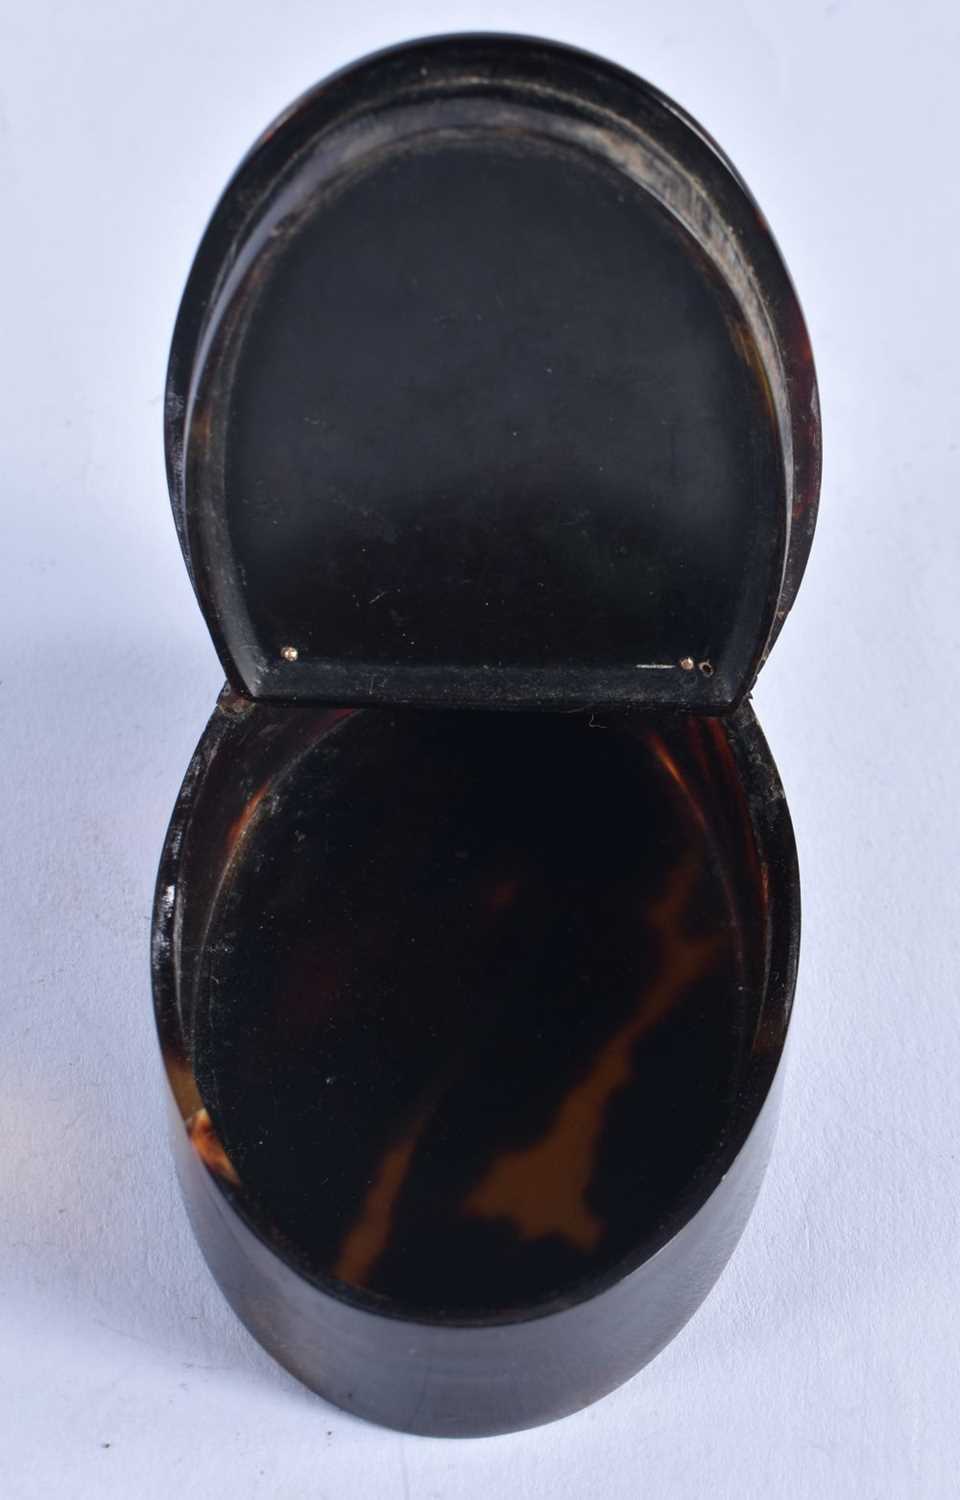 A Regency Period Tortoiseshell Snuff Box with Gold Mounts. The Lid is set with a Polished Agate. 7.8 - Image 3 of 4